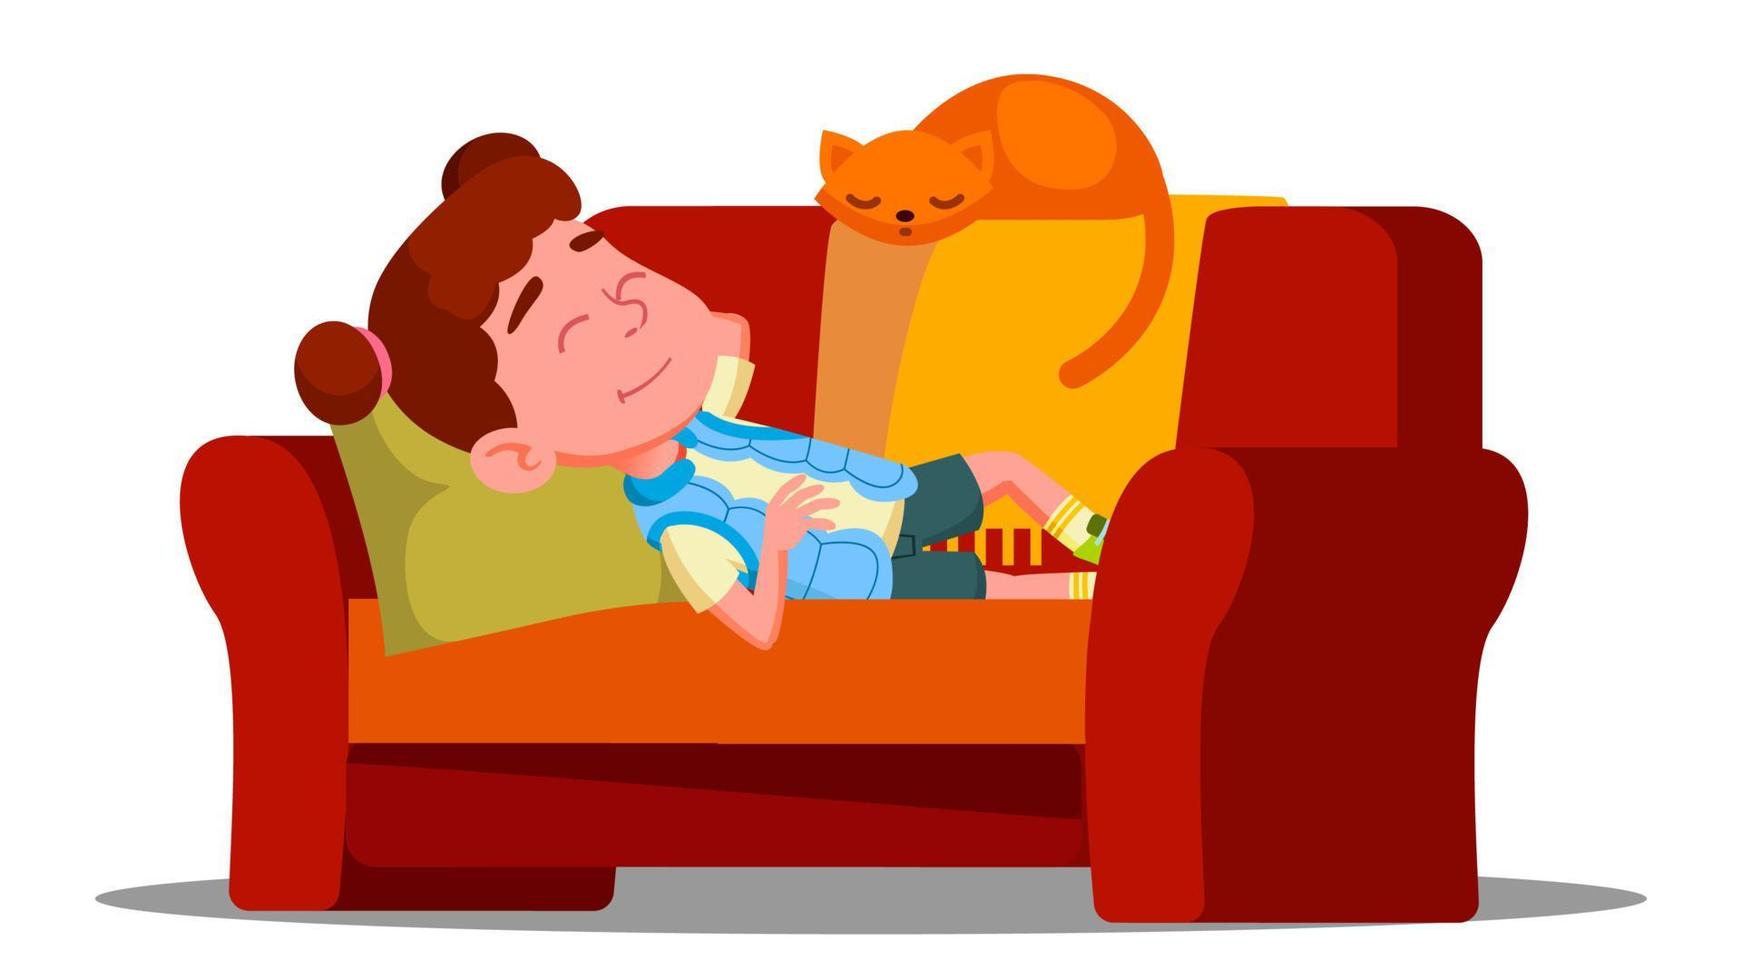 Tired Little Girl Sleeping On The Couch Next To Sleeping Cat Vector. Isolated Illustration vector